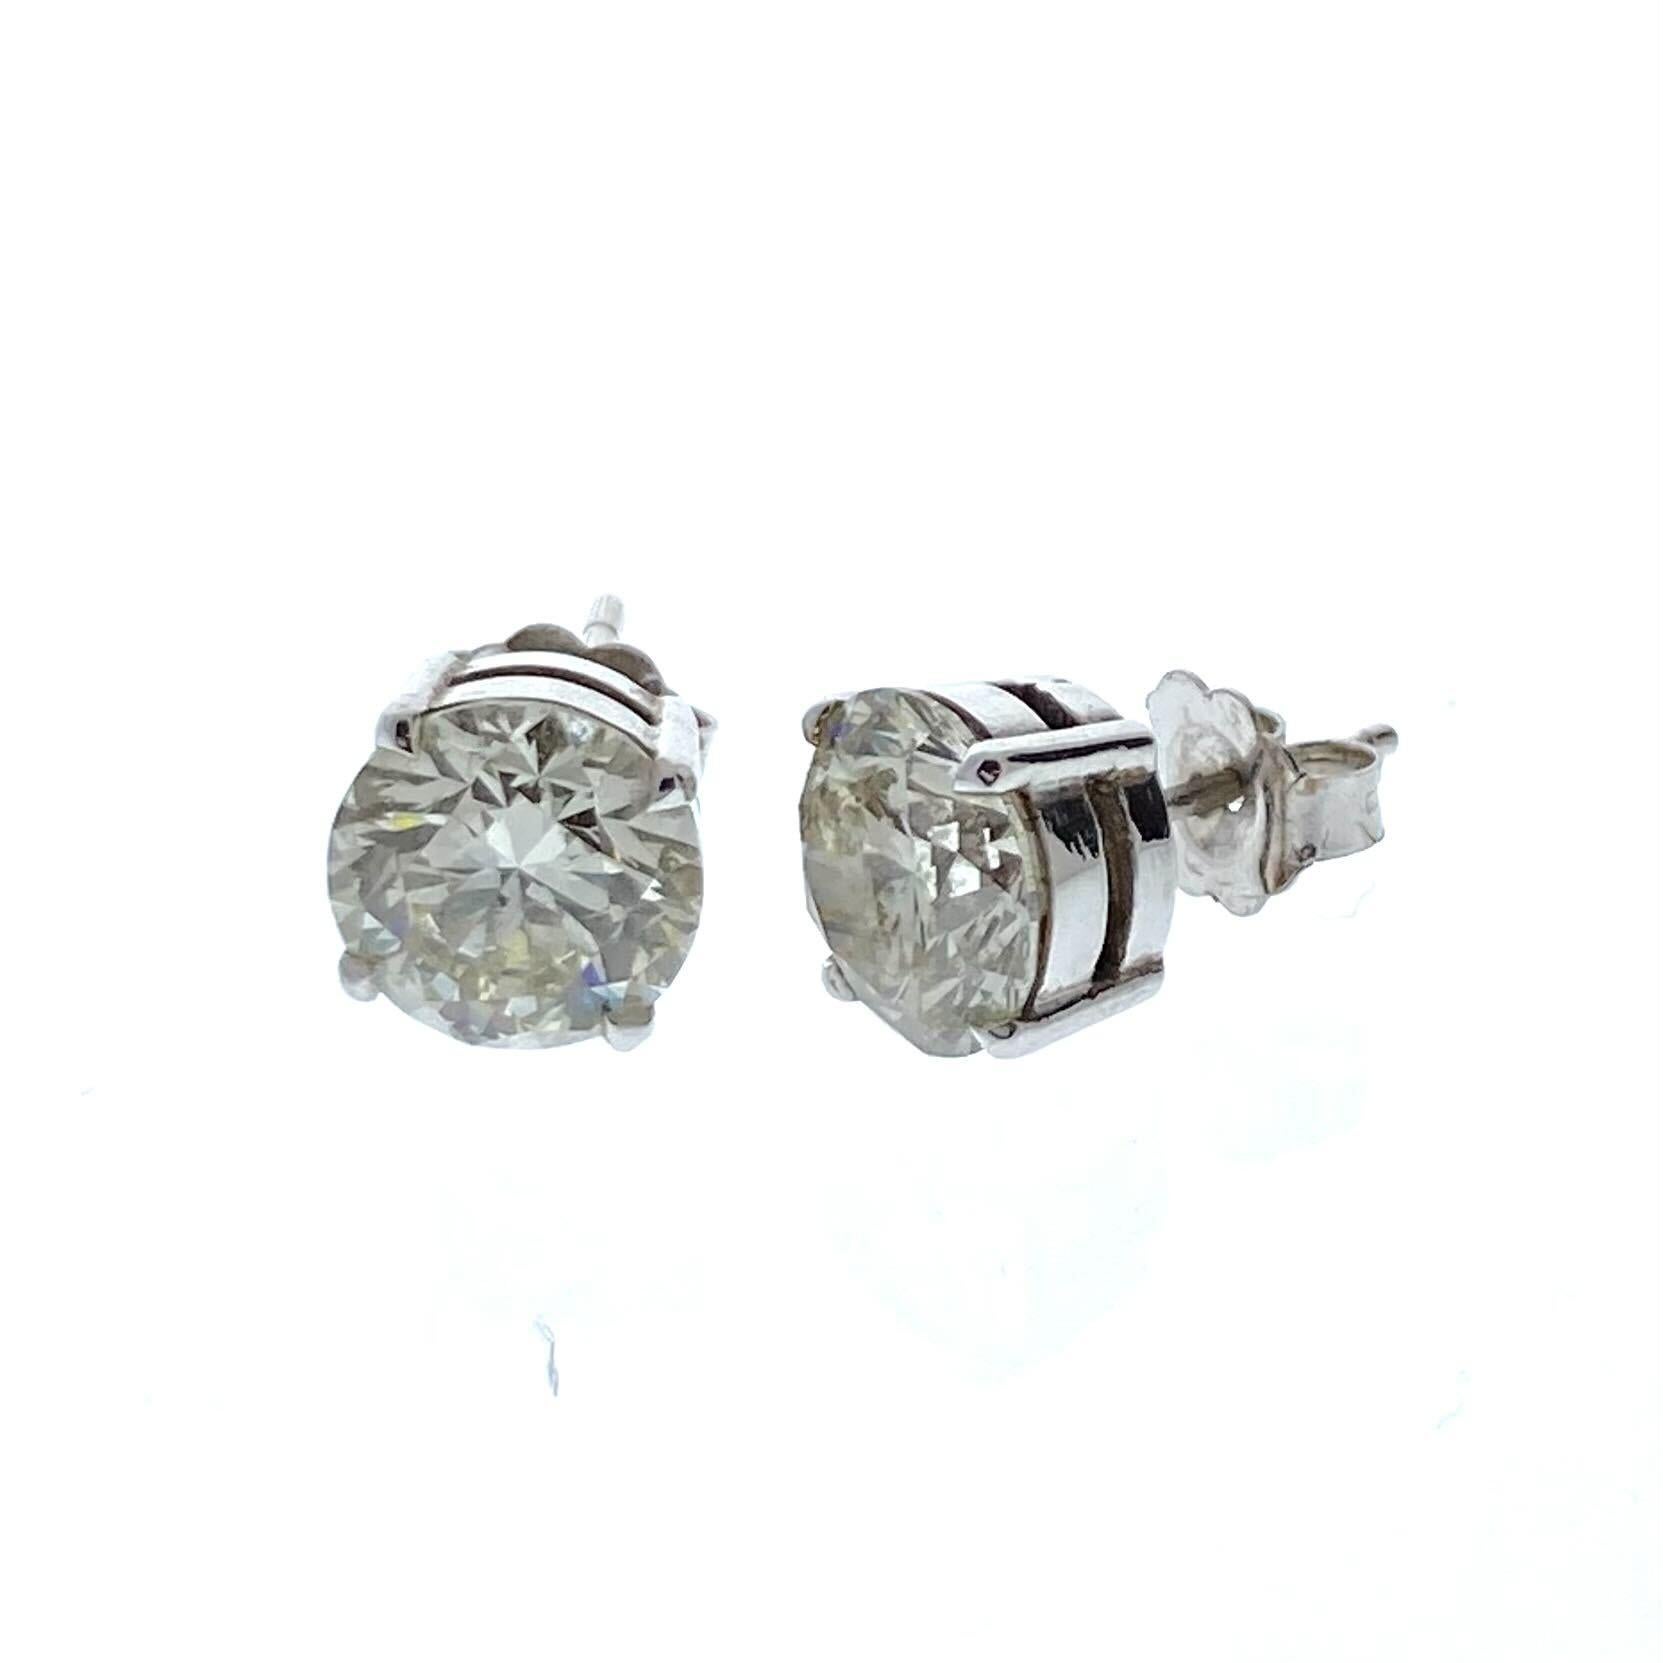 Round Cut 4.01 Total Carat Weight EGL Certified Round Diamond Studs In 14k White Gold For Sale